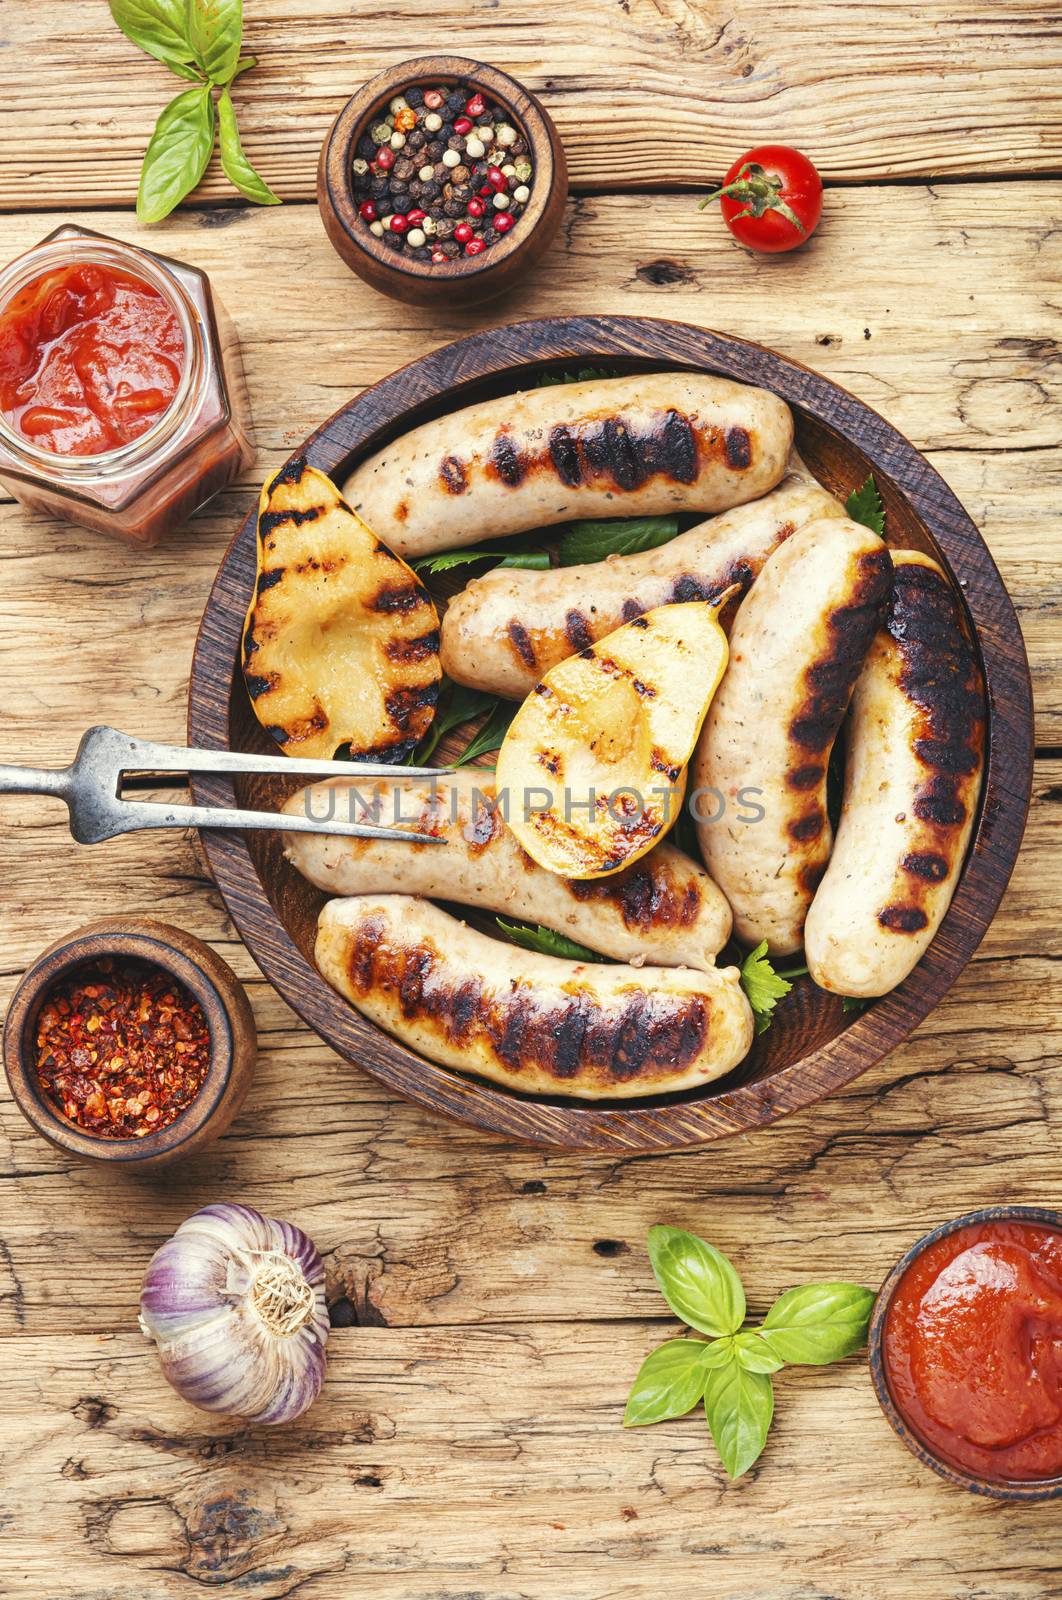 Grilled sausages with pear by LMykola